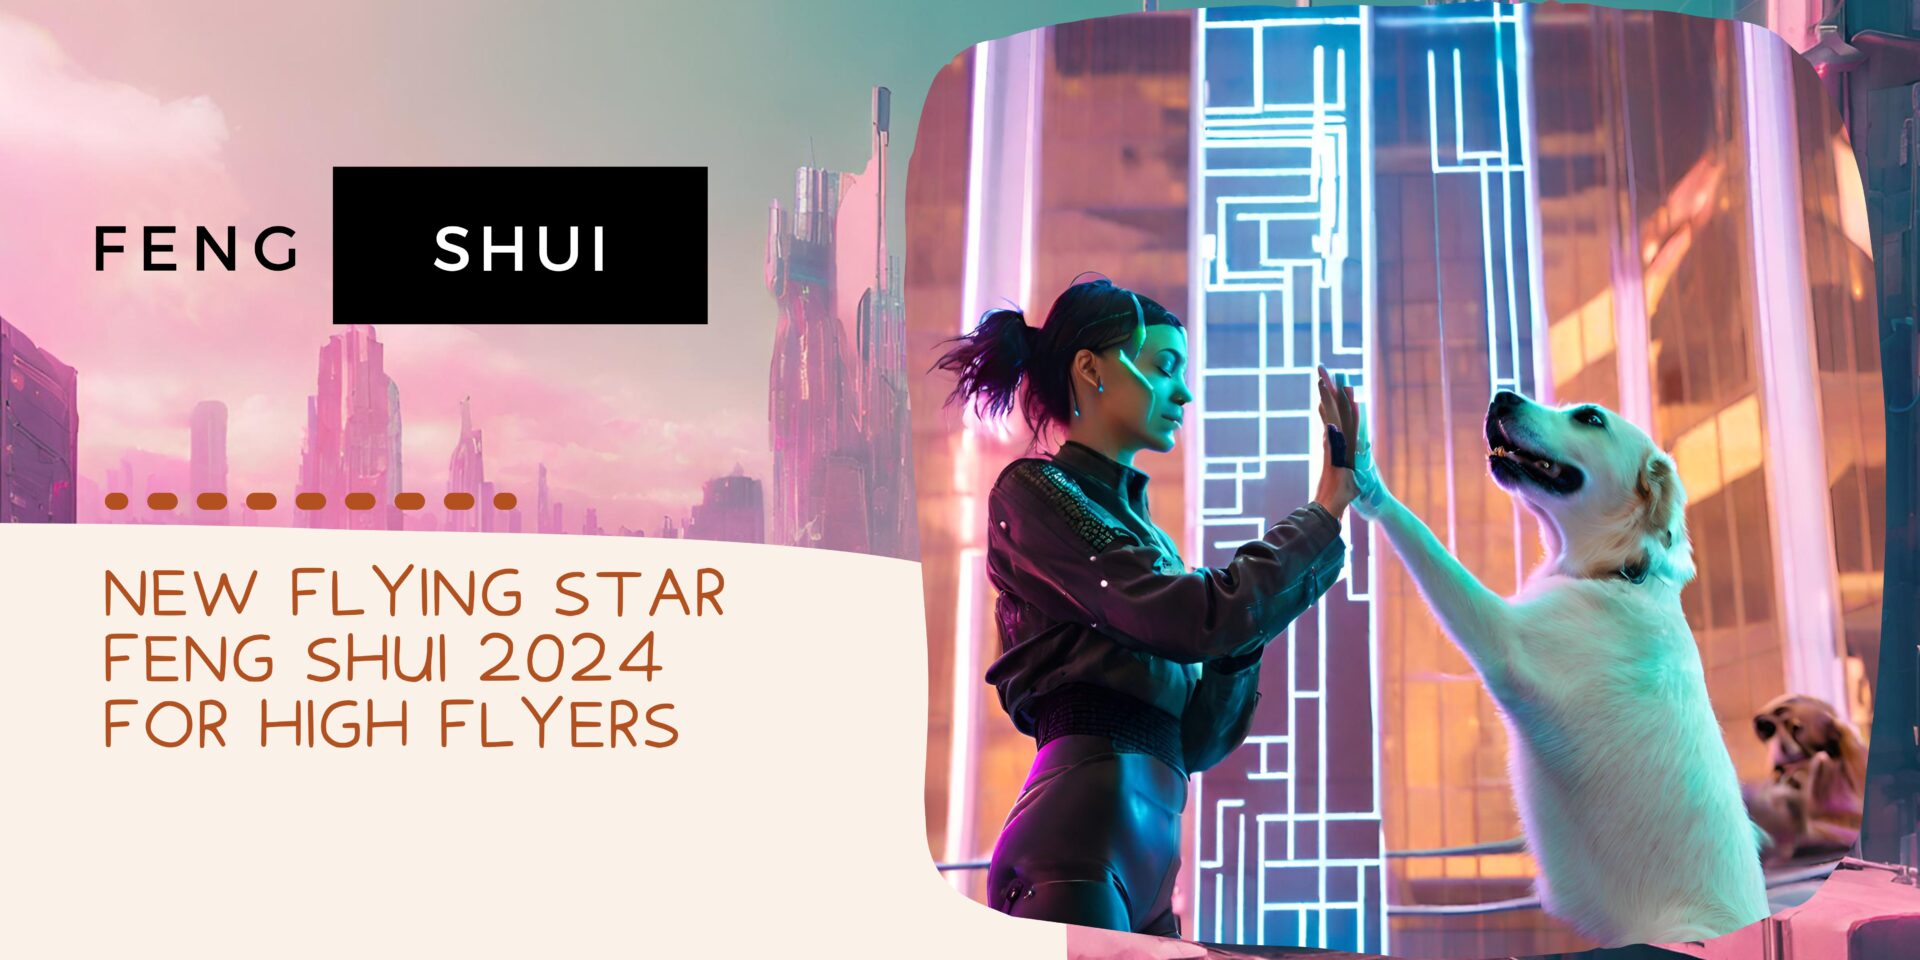 New Flying Star Feng Shui 2024 for High Flyers